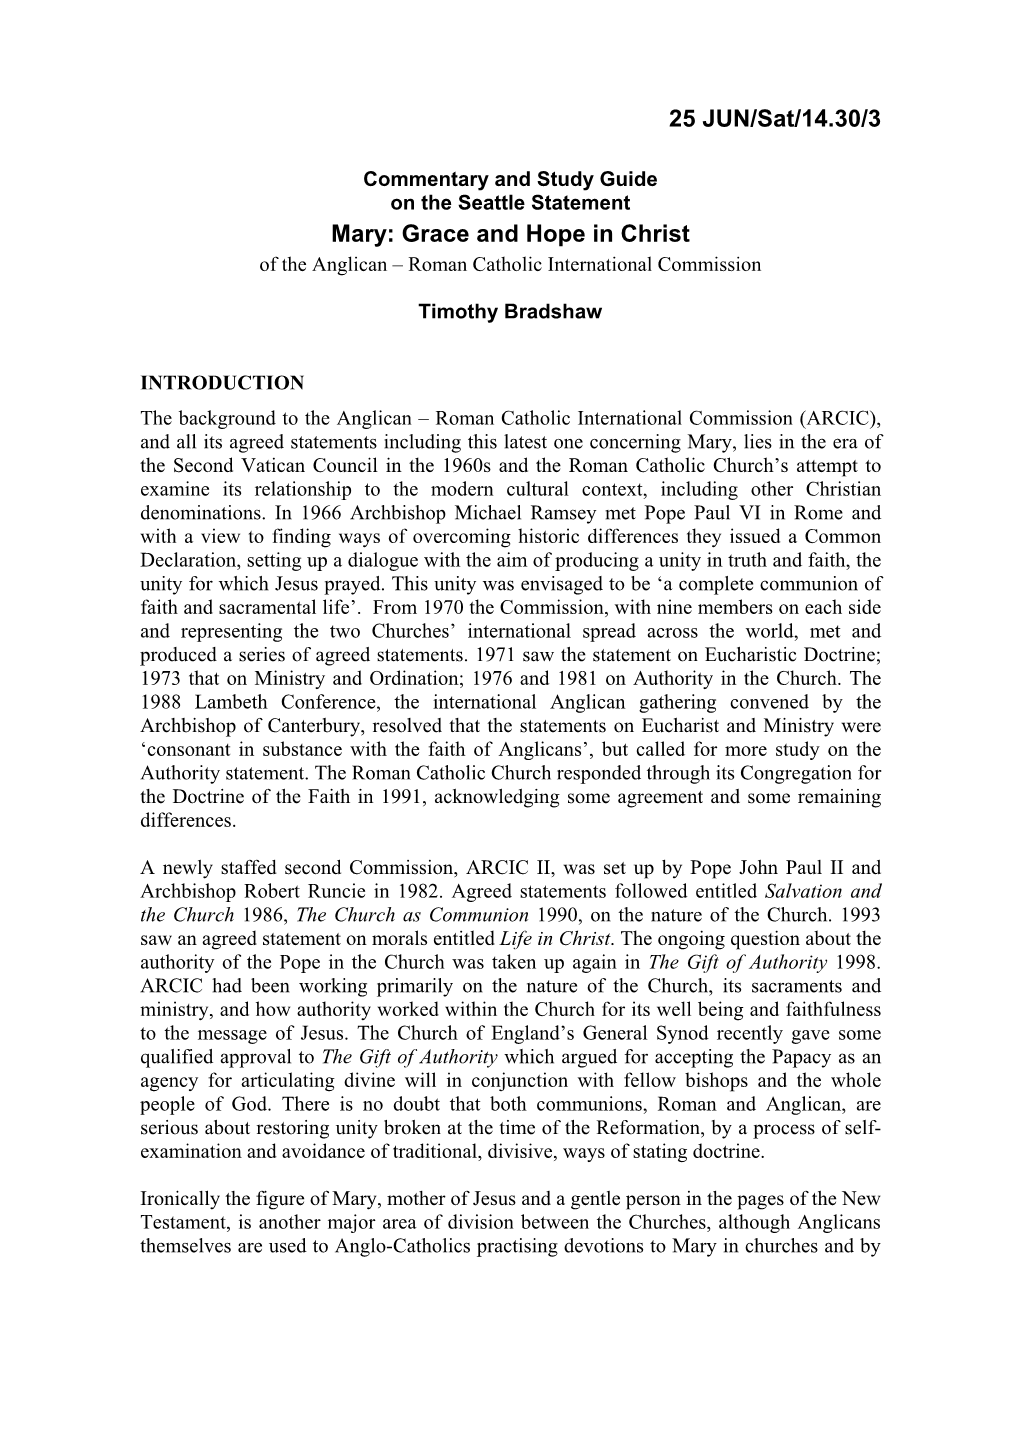 Mary: Grace and Hope in Christ of the Anglican – Roman Catholic International Commission